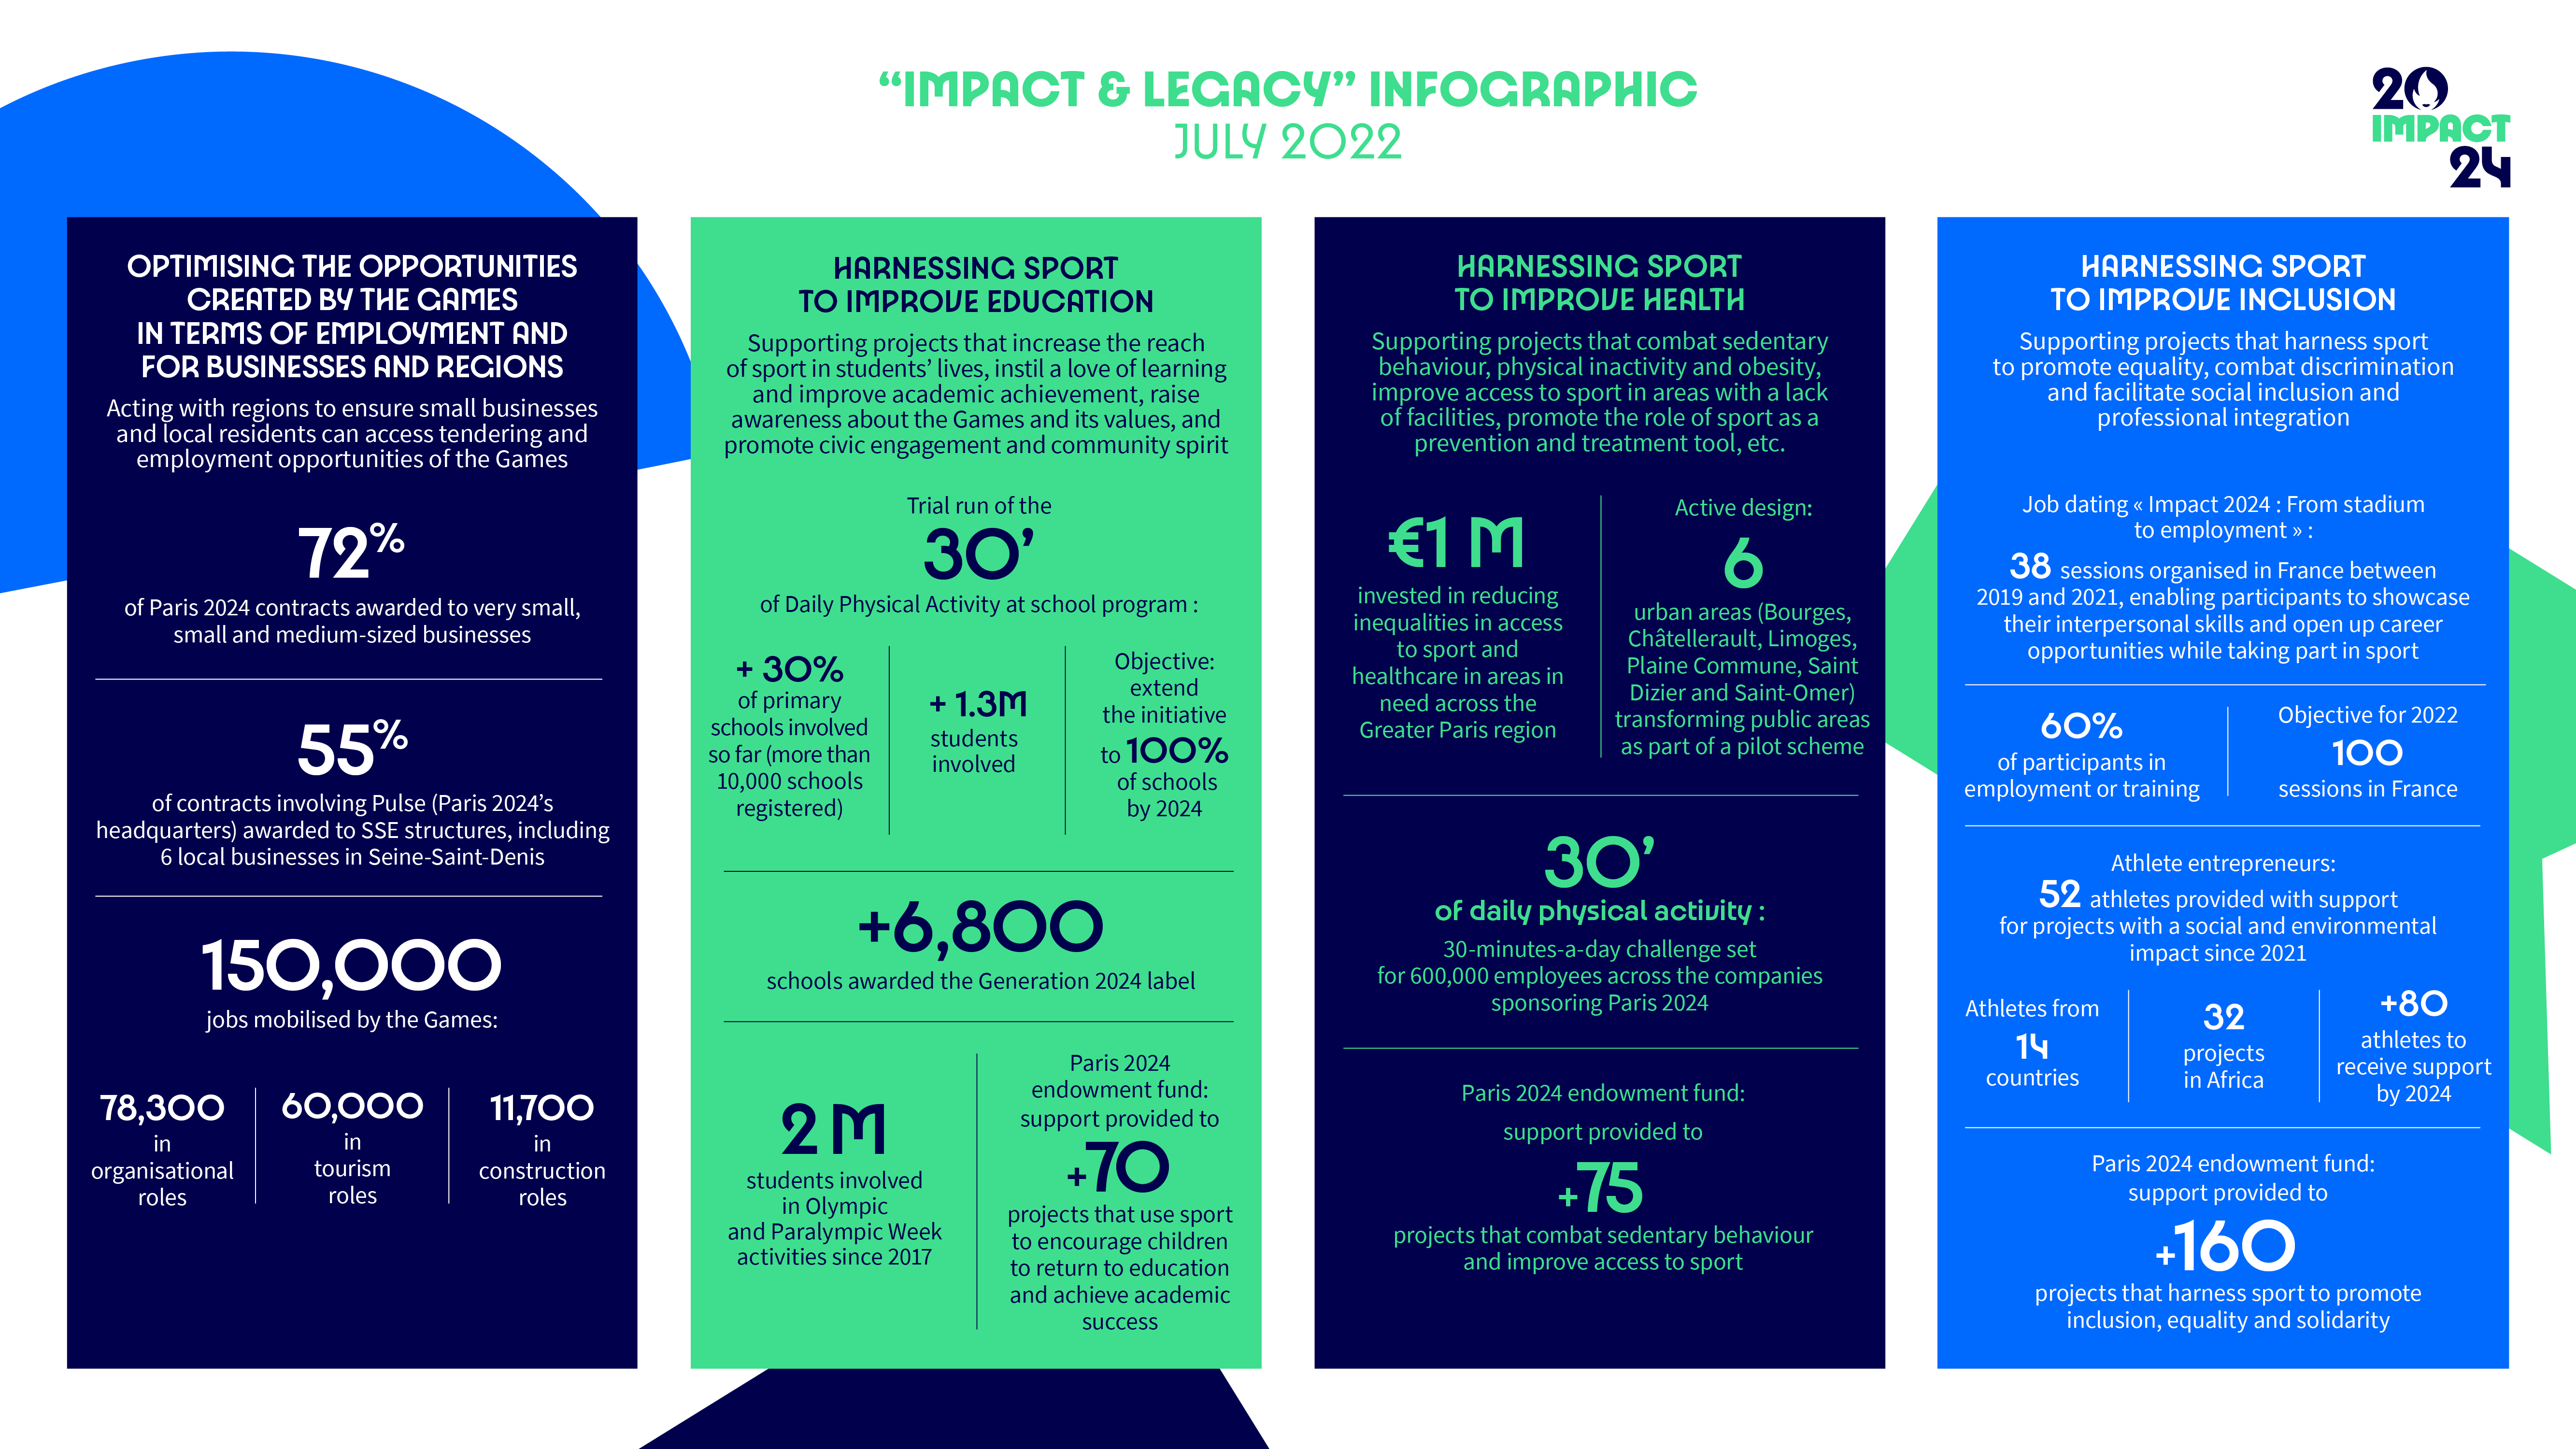 Assessing our impact in order to build the Paris 2024 legacy - Paris 2024